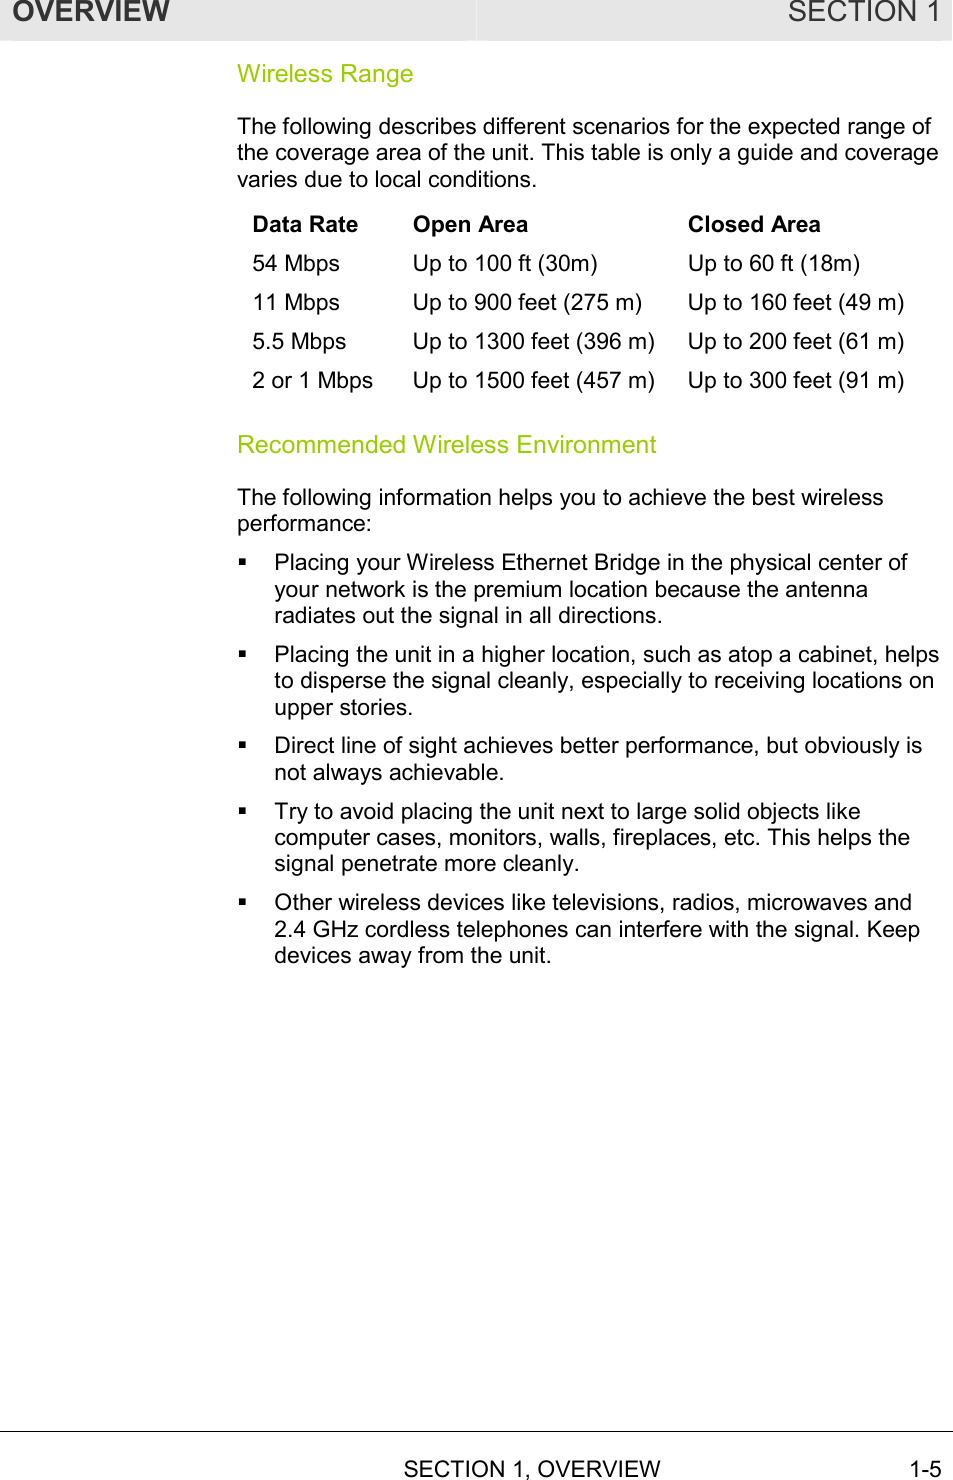 OVERVIEW SECTION 1  SECTION 1, OVERVIEW 1-5 Wireless Range The following describes different scenarios for the expected range of the coverage area of the unit. This table is only a guide and coverage varies due to local conditions. Data Rate  Open Area  Closed Area 54 Mbps  Up to 100 ft (30m)  Up to 60 ft (18m) 11 Mbps  Up to 900 feet (275 m)  Up to 160 feet (49 m) 5.5 Mbps  Up to 1300 feet (396 m)  Up to 200 feet (61 m) 2 or 1 Mbps  Up to 1500 feet (457 m)  Up to 300 feet (91 m) Recommended Wireless Environment The following information helps you to achieve the best wireless performance: !  Placing your Wireless Ethernet Bridge in the physical center of your network is the premium location because the antenna radiates out the signal in all directions. !  Placing the unit in a higher location, such as atop a cabinet, helps to disperse the signal cleanly, especially to receiving locations on upper stories. !  Direct line of sight achieves better performance, but obviously is not always achievable. !  Try to avoid placing the unit next to large solid objects like computer cases, monitors, walls, fireplaces, etc. This helps the signal penetrate more cleanly. !  Other wireless devices like televisions, radios, microwaves and 2.4 GHz cordless telephones can interfere with the signal. Keep devices away from the unit. 